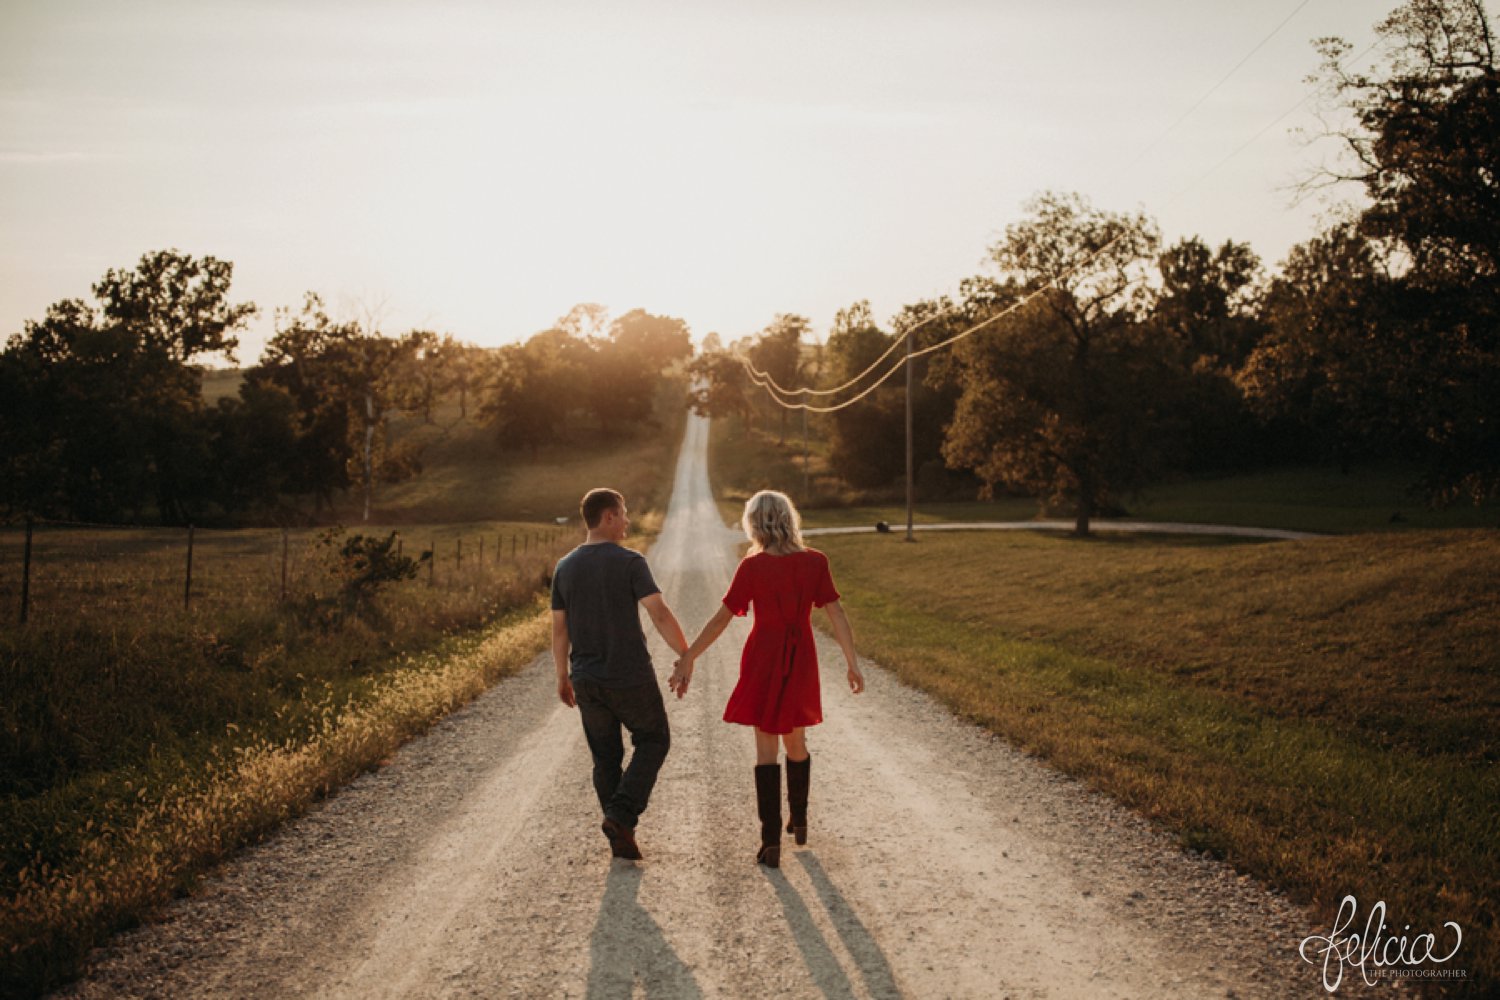 images by feliciathephotographer.com | destination wedding photographer | engagement | farmhouse | country | kansas city | sweet southern | red dress | nordstrom rack | unique halo diamond ring | casual | brown boots | amazon | cowboy | hand in hand | dirt road | golden hour | 